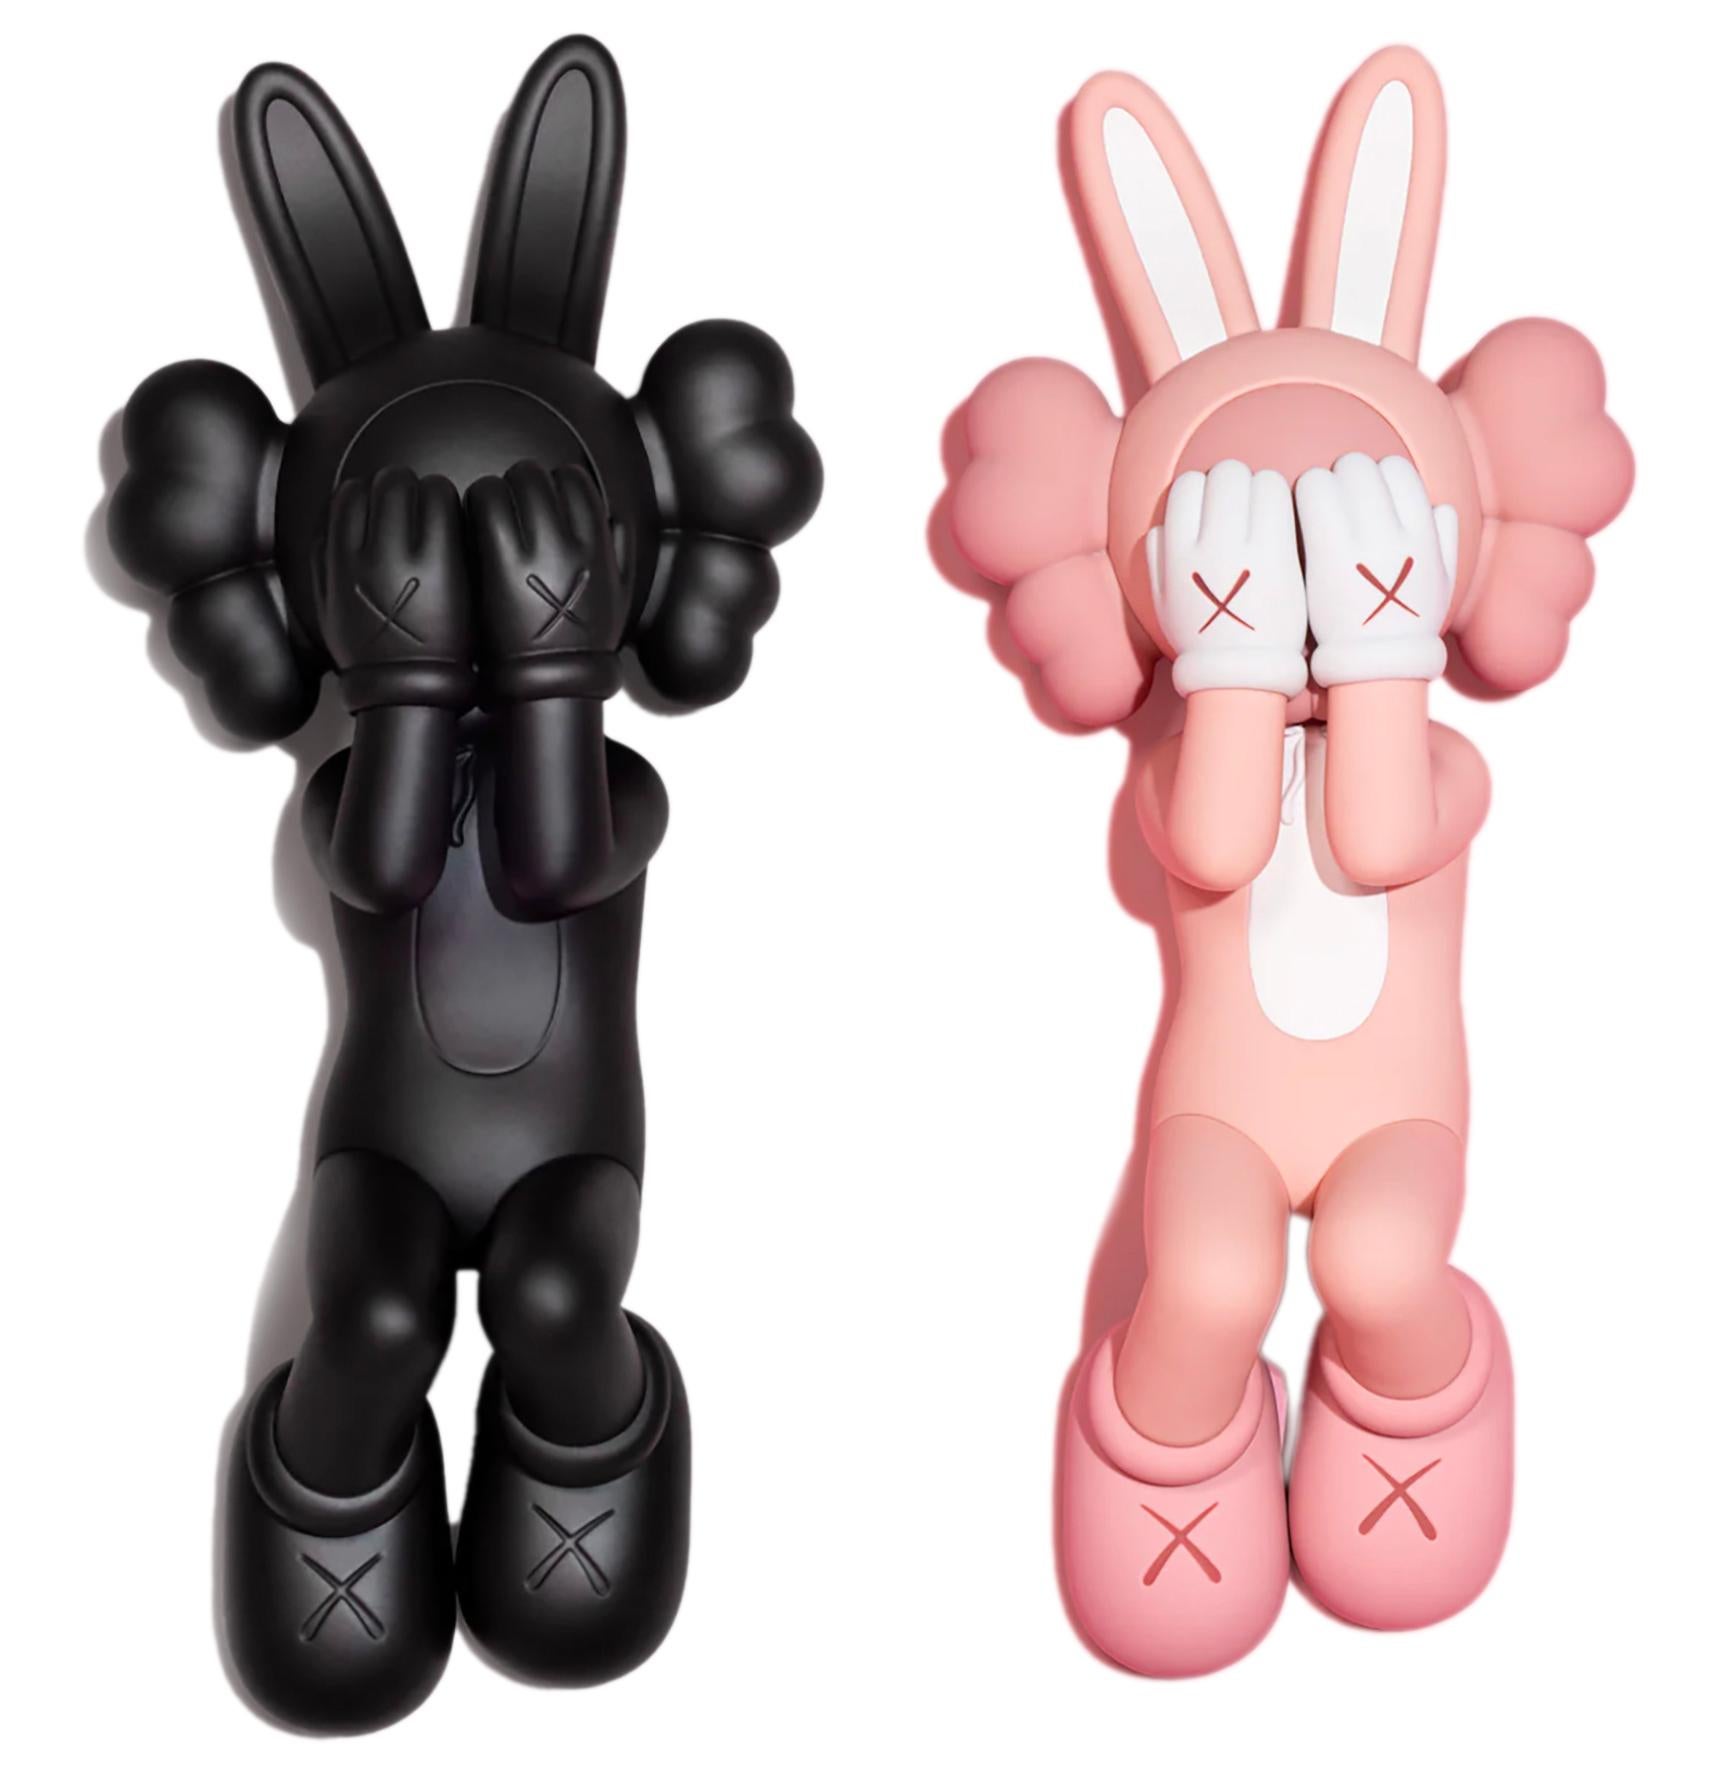 KAWS Holiday Indonesia: complete set of 2 works (KAWS Indonesia):
These figurative vinyl sculptures feature KAWS' Accomplice character in a resting position; published on the occasion of KAWS’ 45 meter version, exhibited at Indonesia's UNESCO World